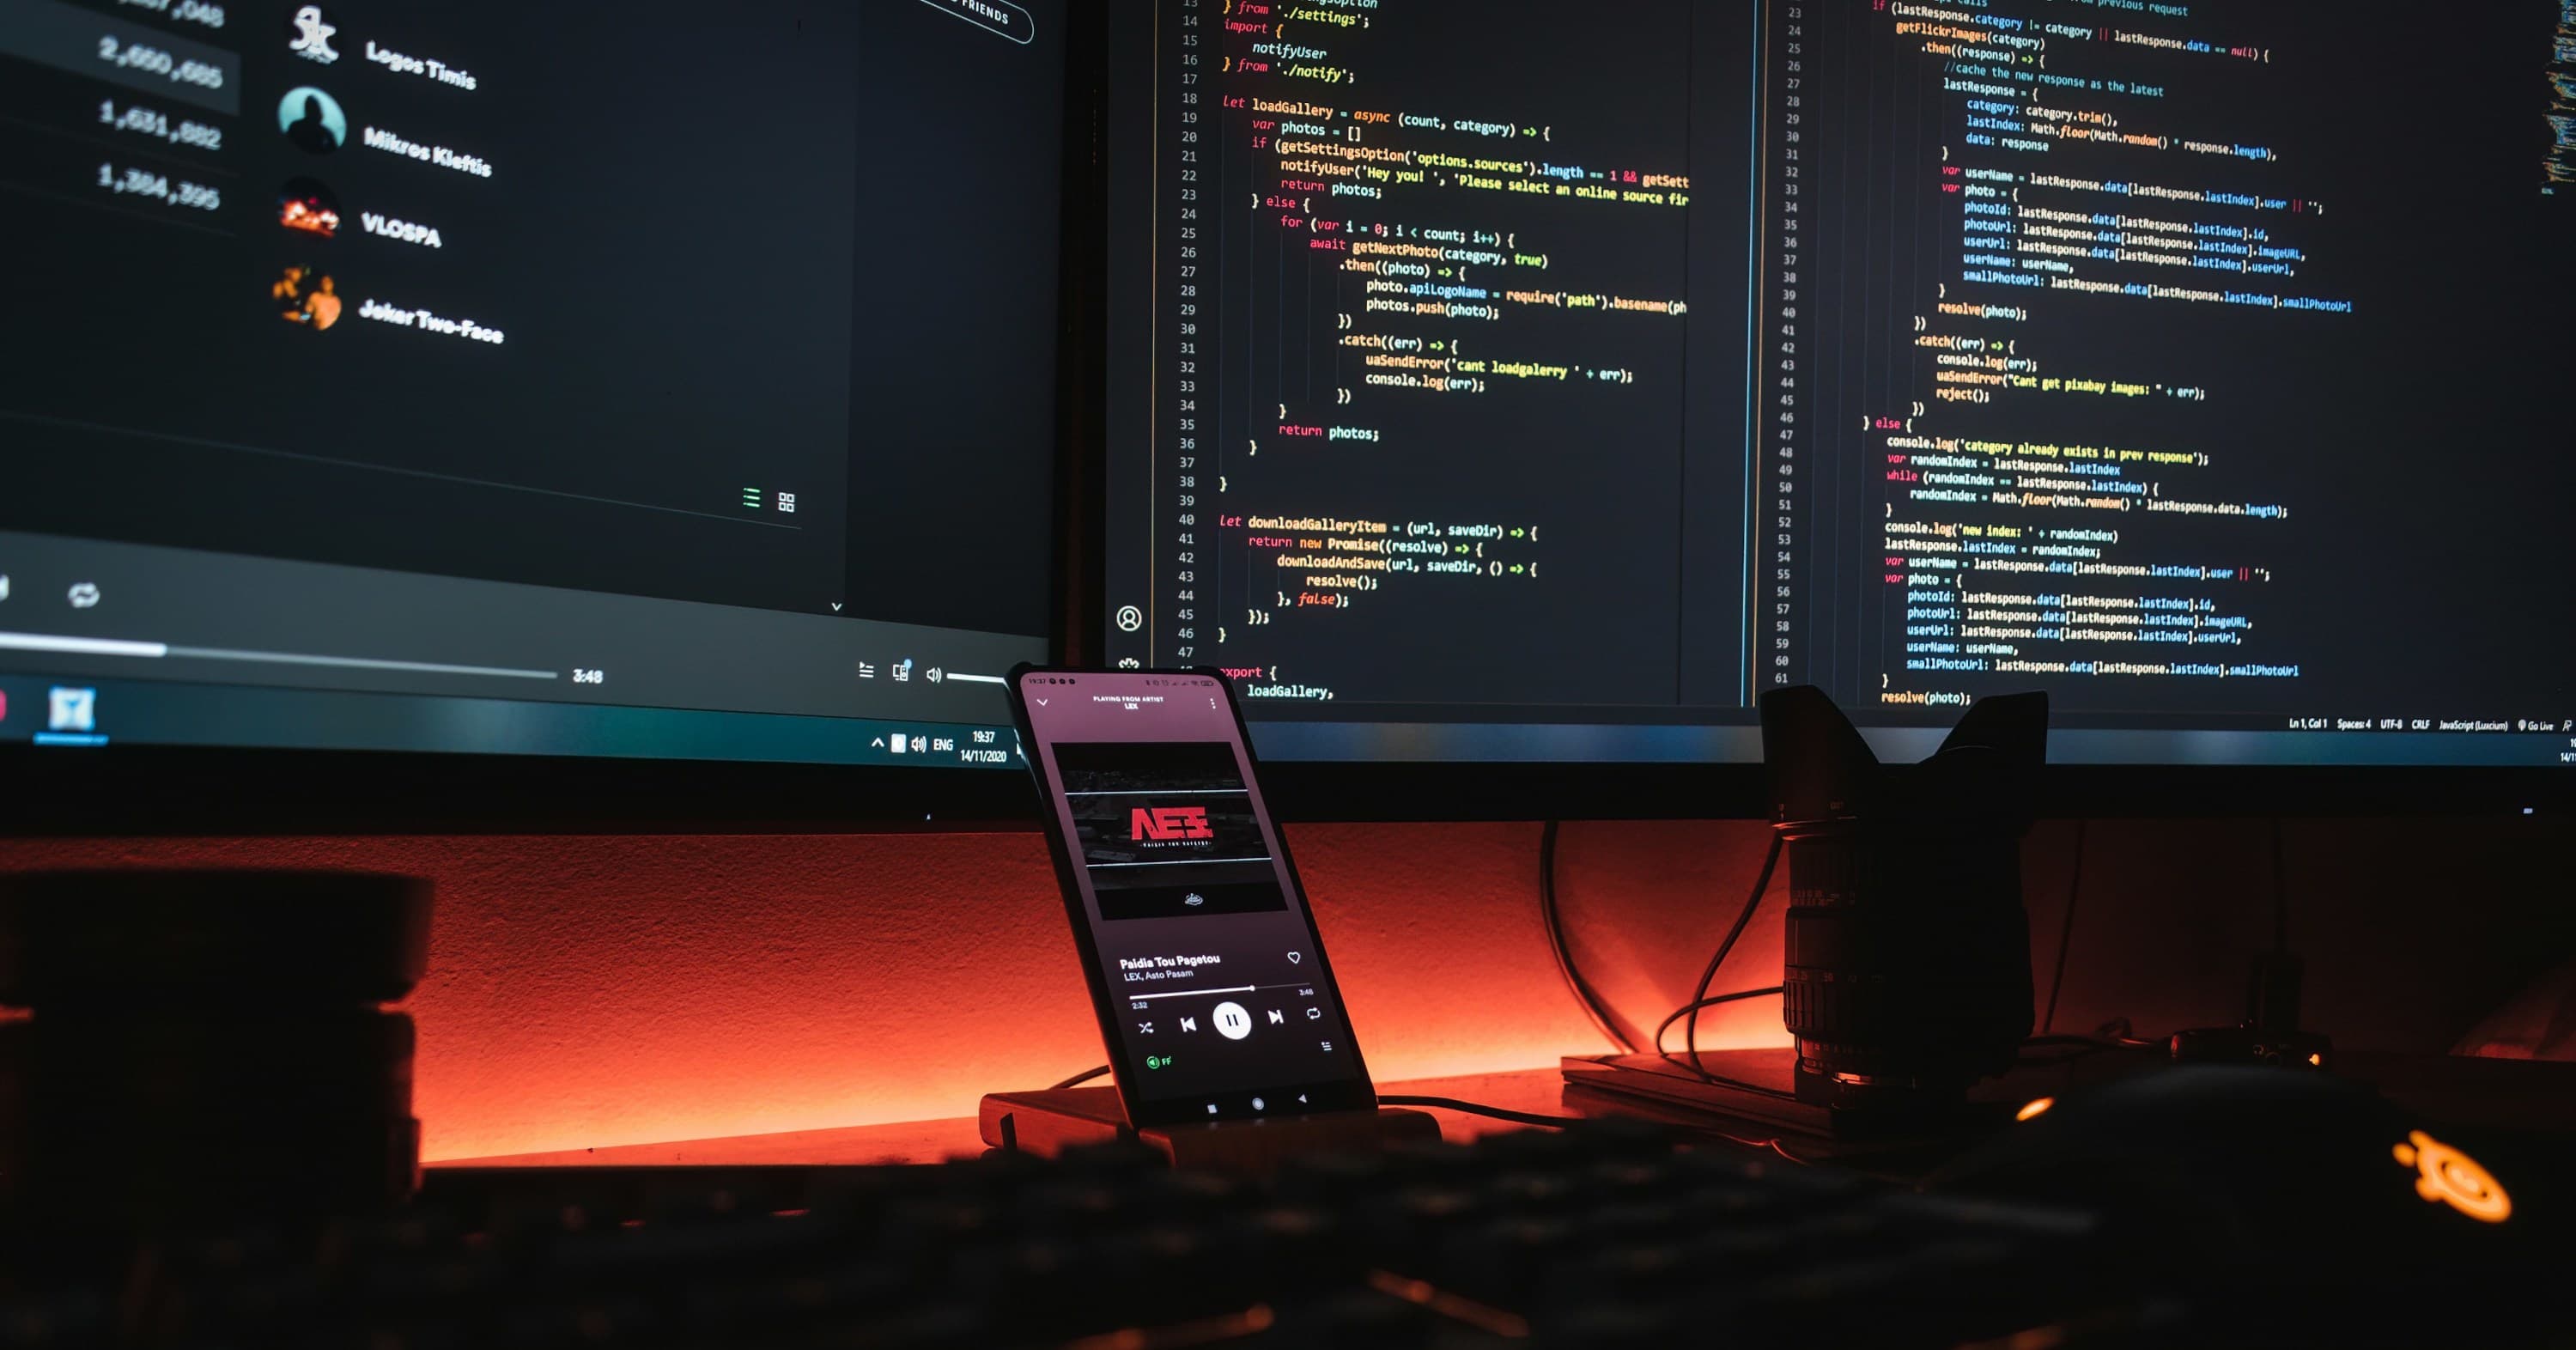 two monitor desk setup with red backlights showing code on one screen and spotify on the other with a phone between them